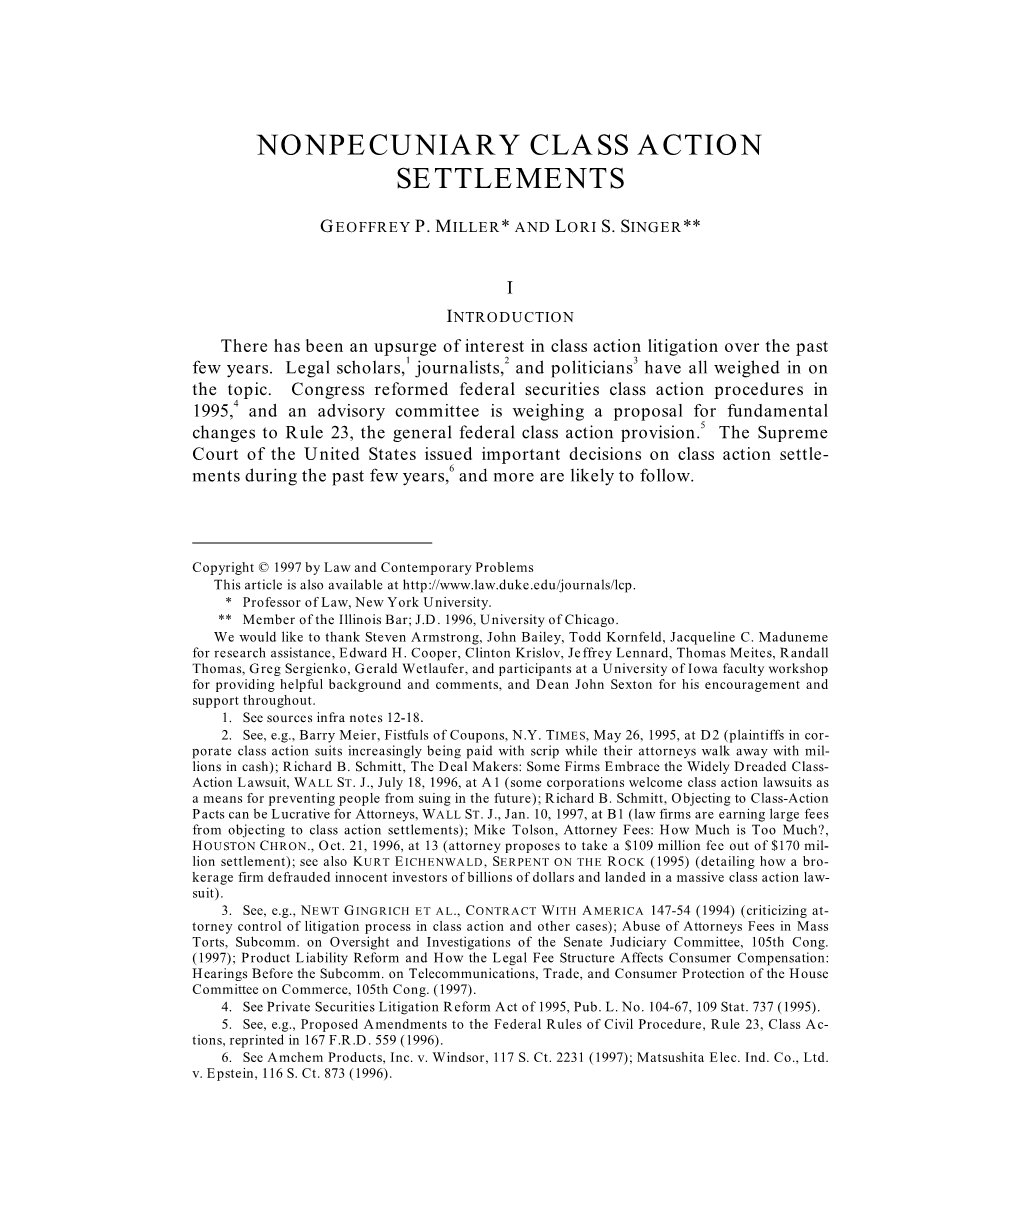 Nonpecuniary Class Action Settlements